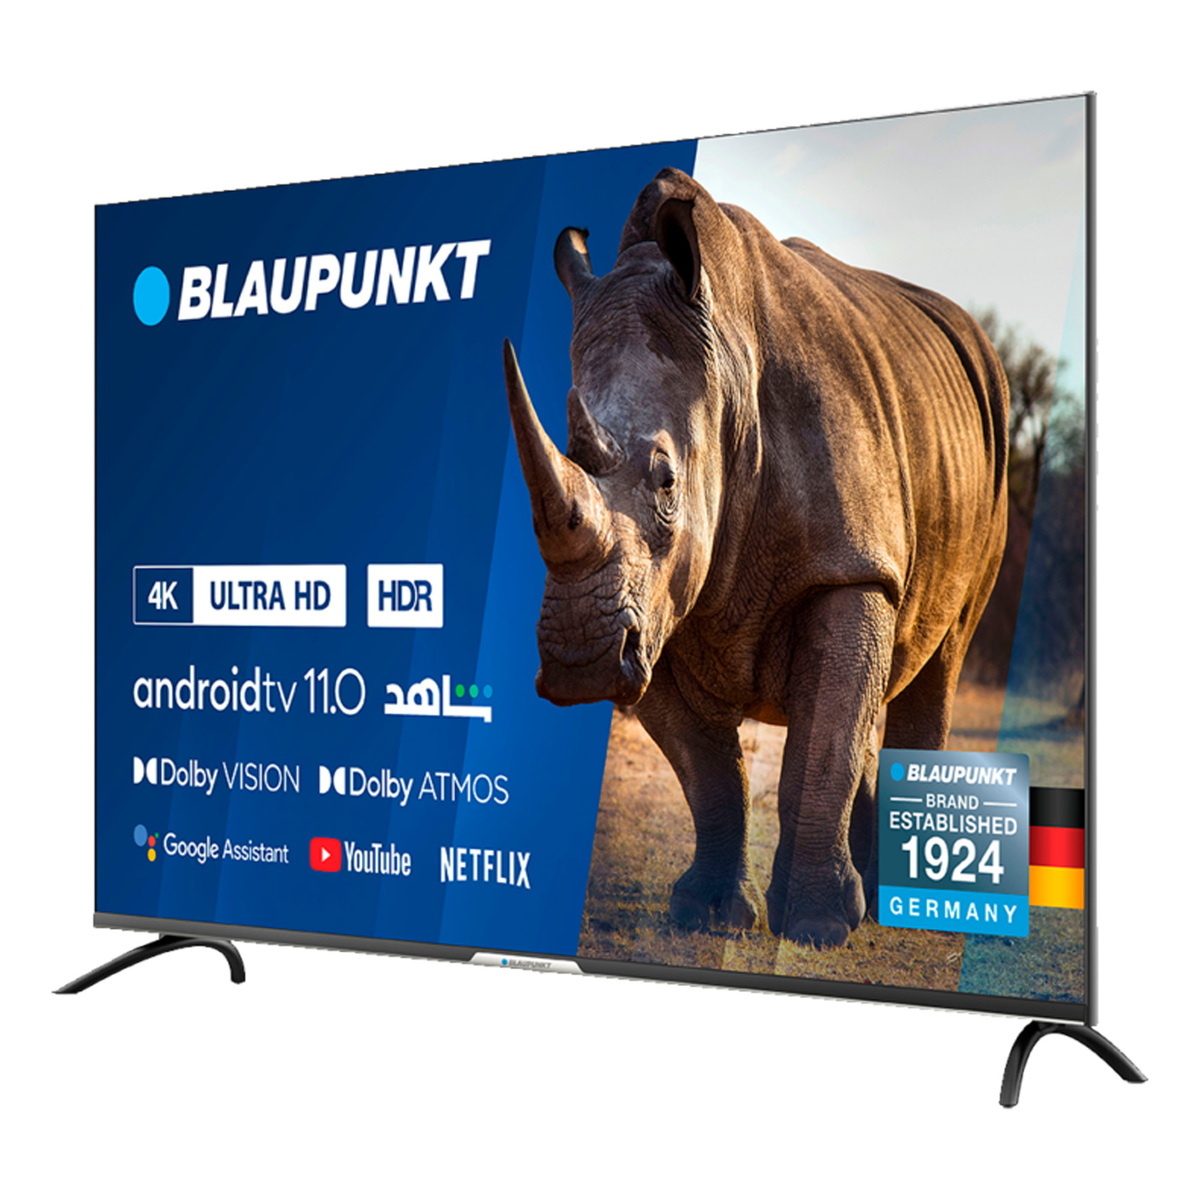 Blaupunkt 43 inches 4K-UHD Android LED Smart TV, 43UBC6000D